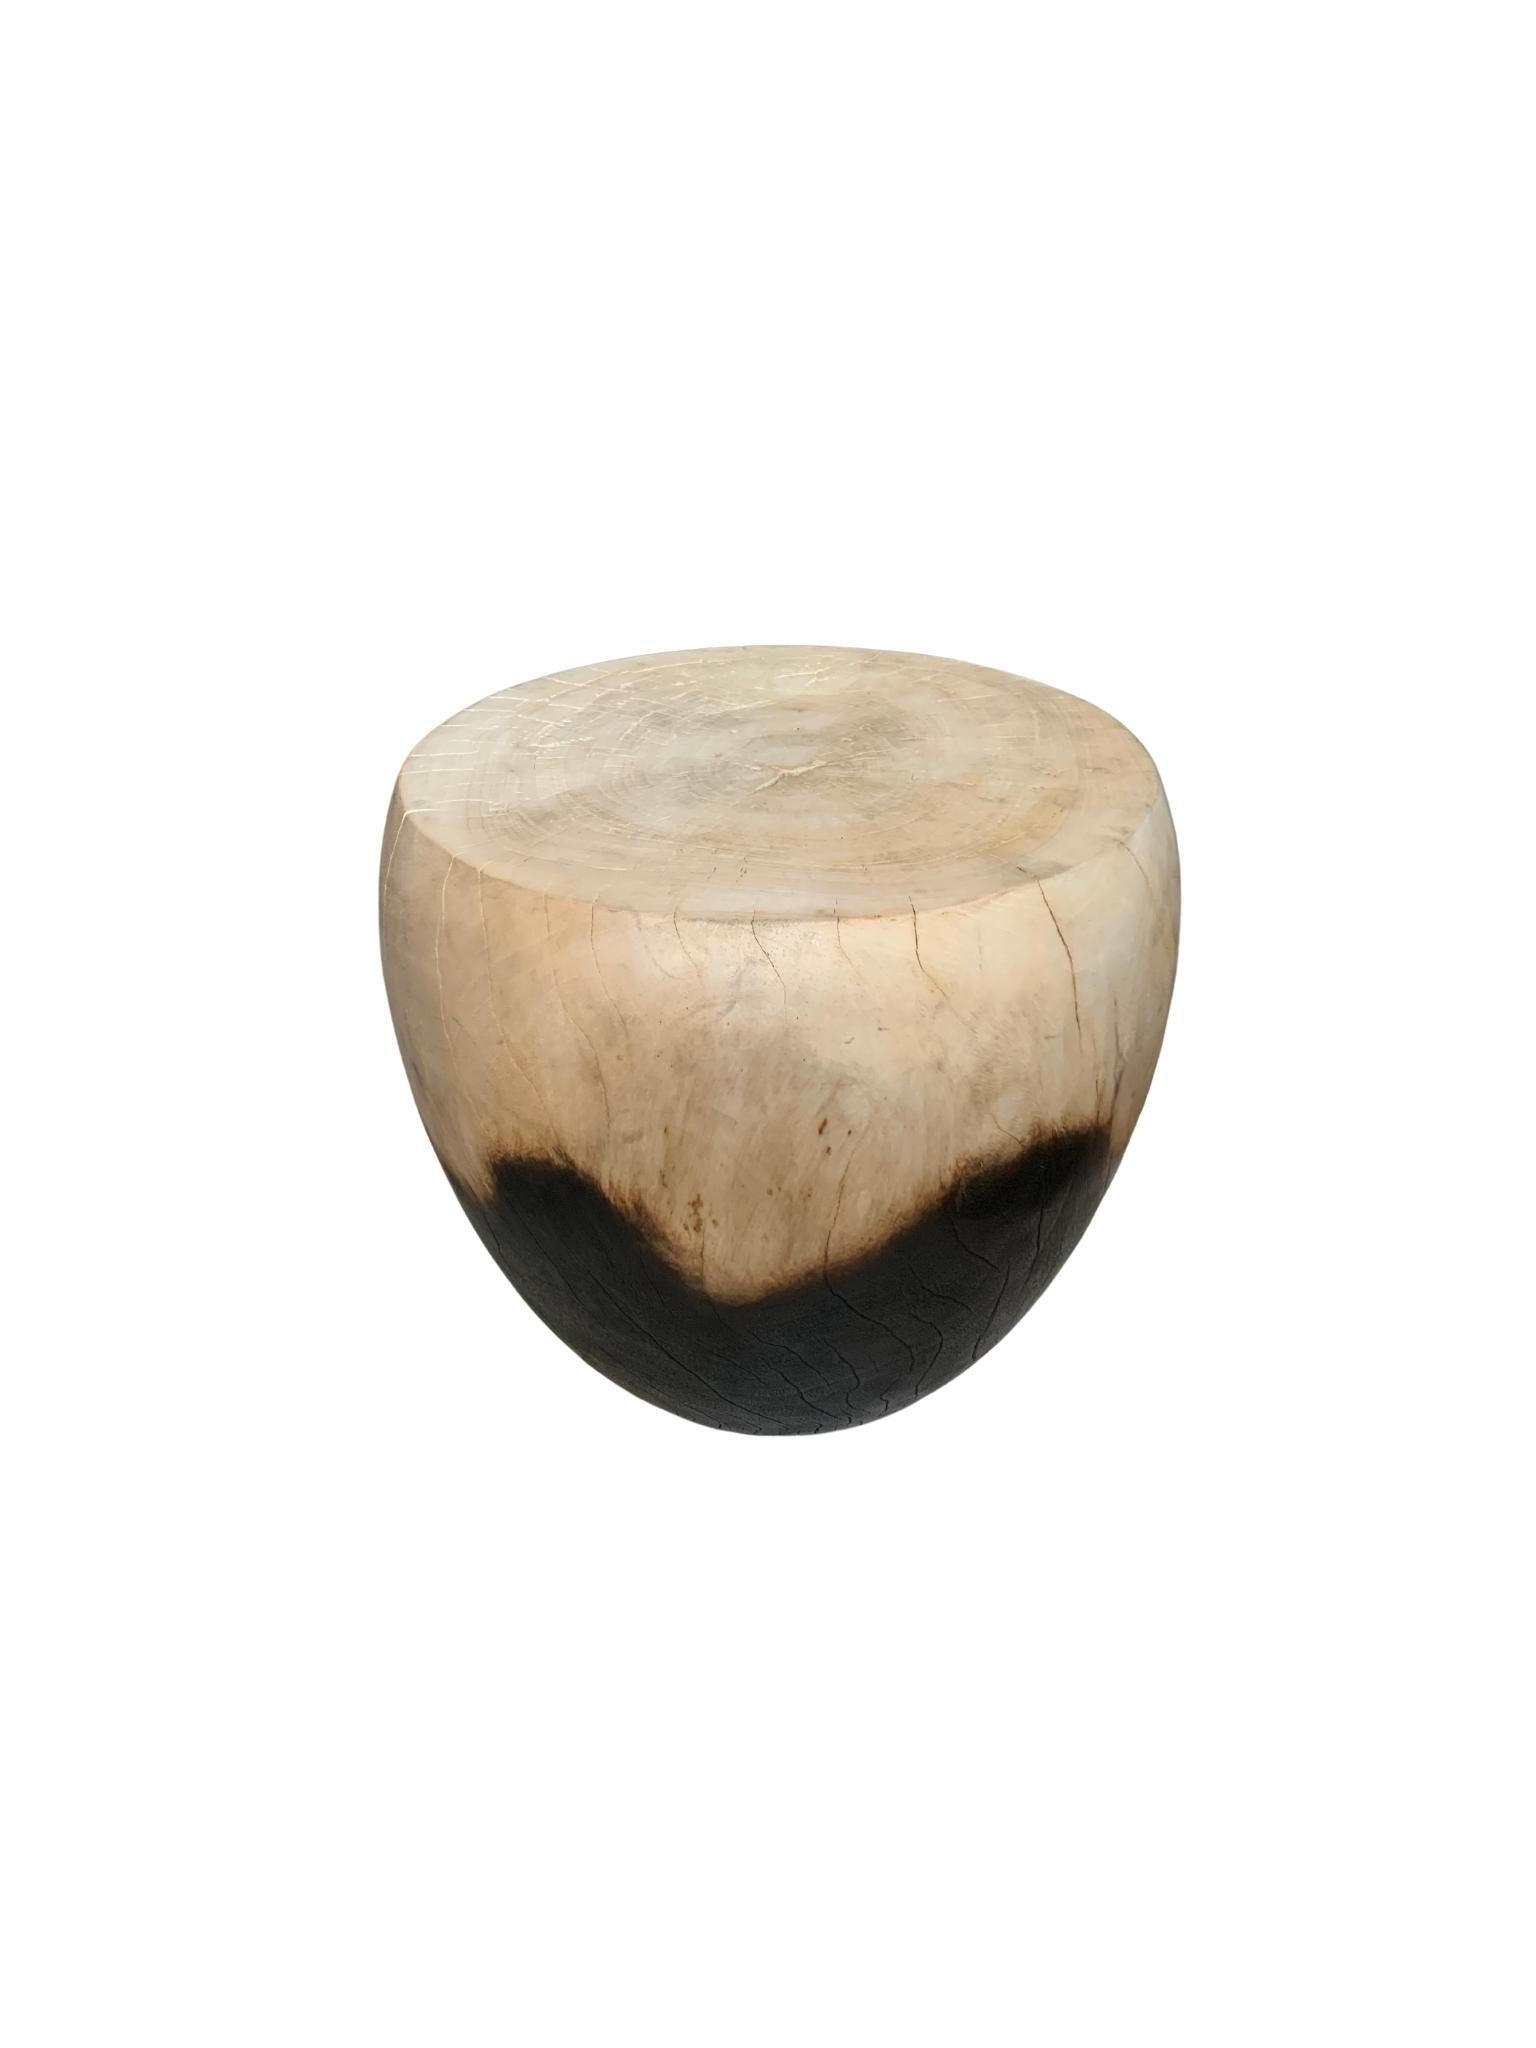 A wonderfully sculptural round side table. Its rich black pigment was achieved through burning the wood three times. Its contrast of cream/white and black was further achieved by bleaching the upper half of the table, creating a wonderful effect.